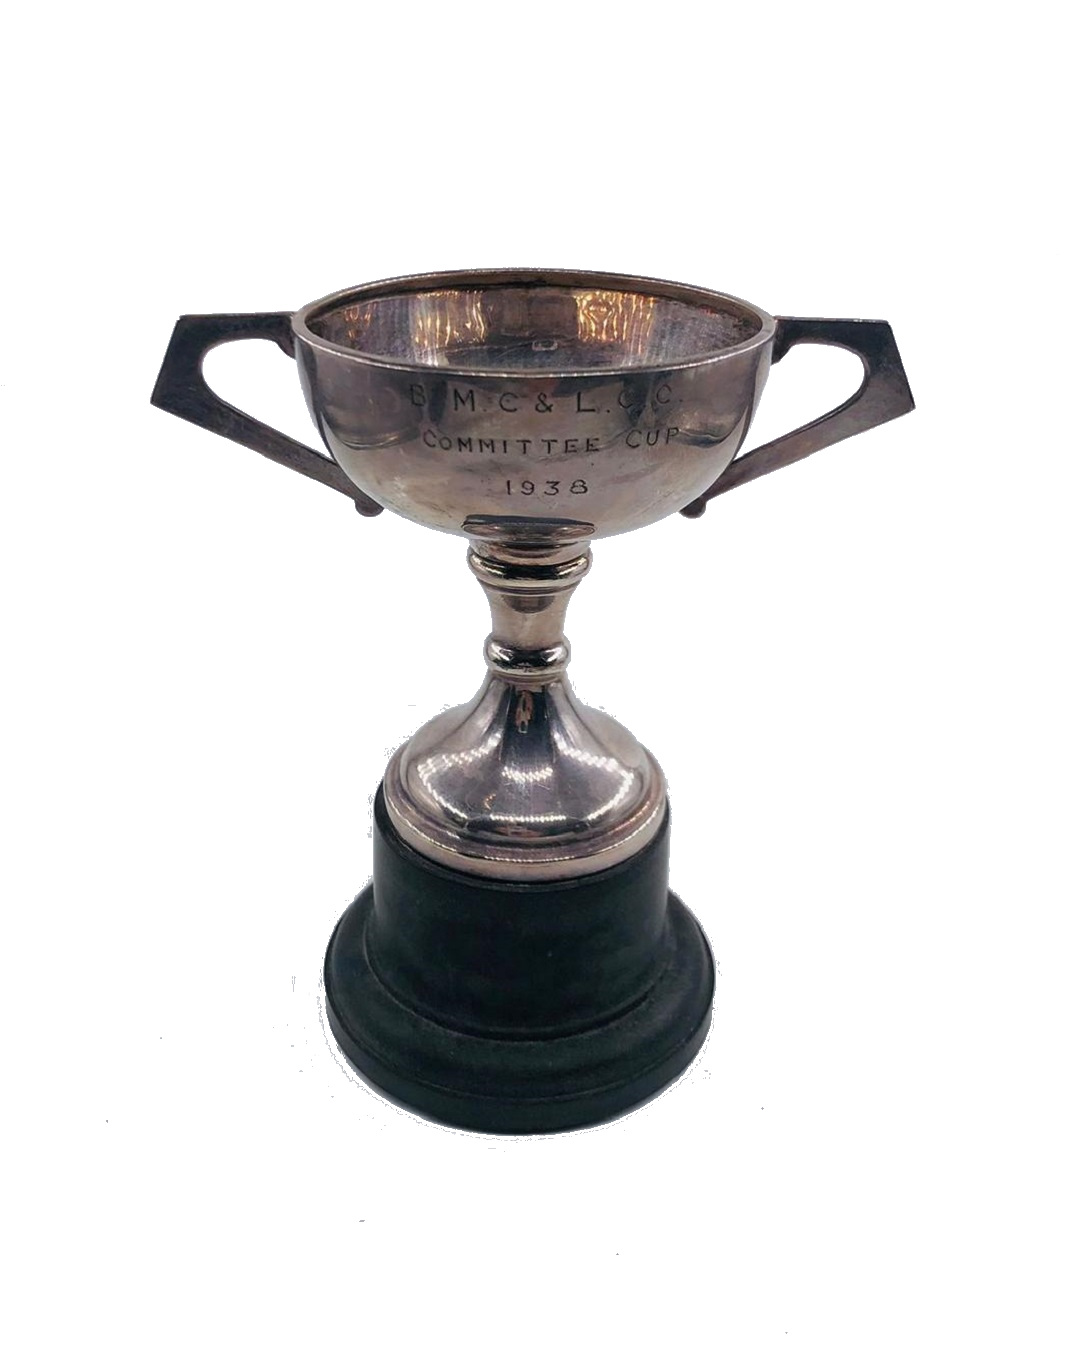 Committee cup